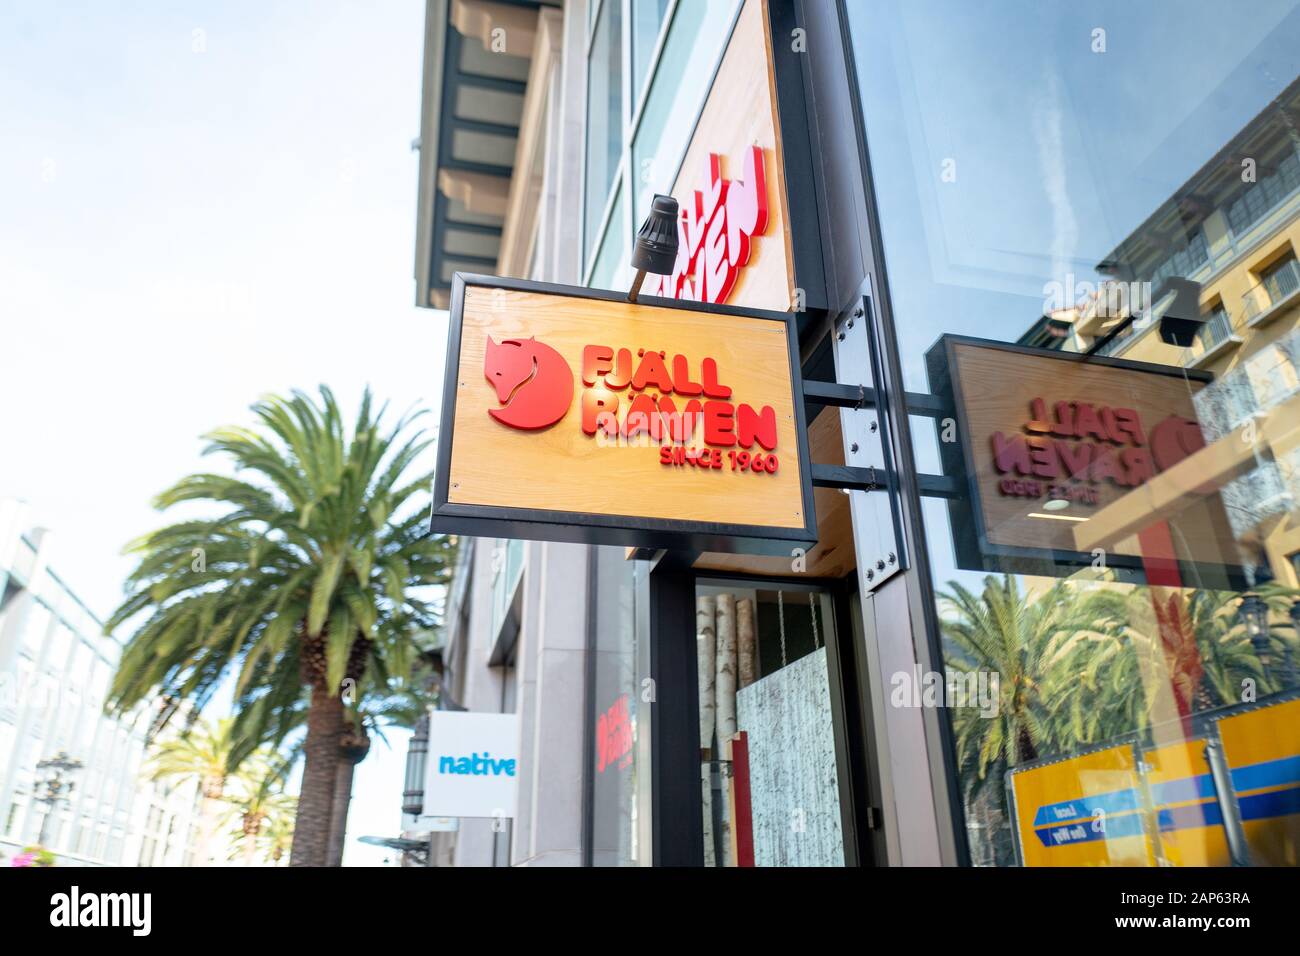 Sign on facade of Fjallraven Swedish outdoor clothing store on Santana Row in the Silicon Valley, San Jose, California, January 3, 2020. () Stock Photo